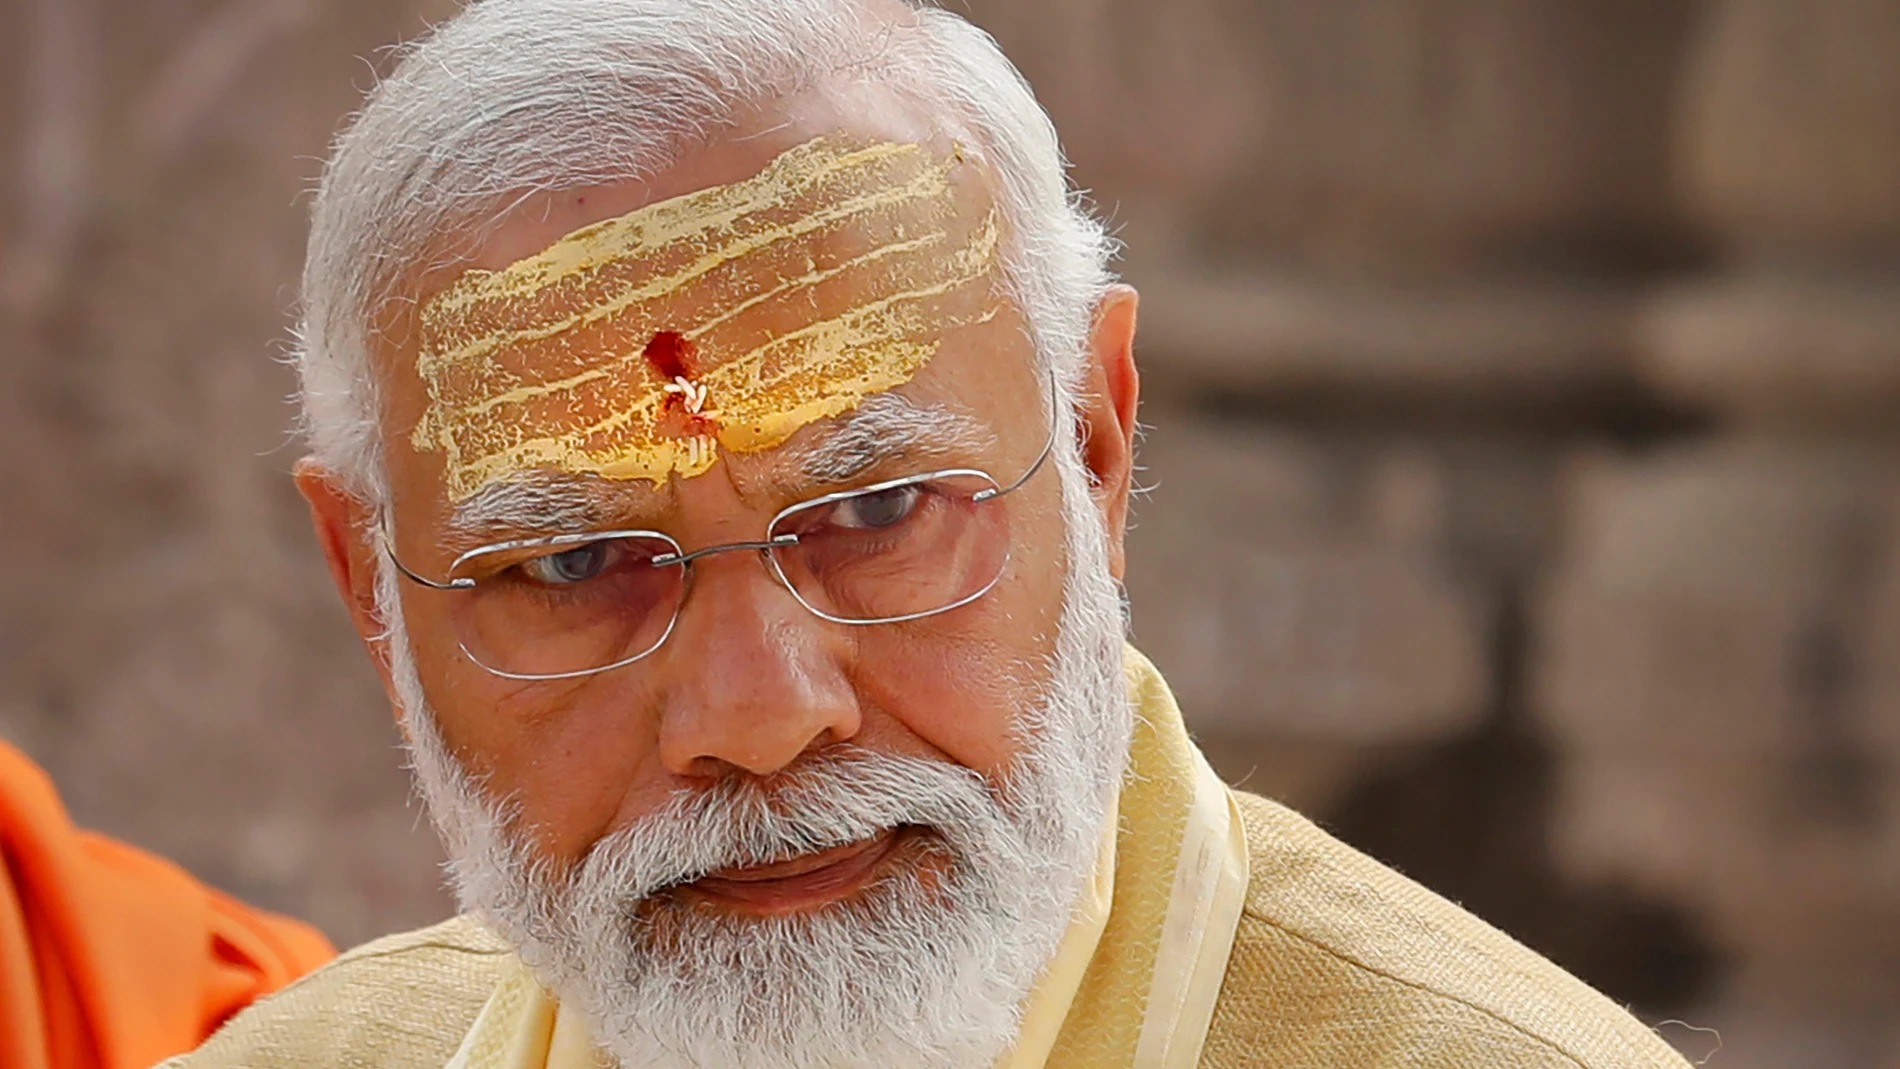 FILE- Indian Prime Minister Narendra Modi has sandalwood paste and vermilion applied on his forehead during the inauguration of Kashi Vishwanath Dham Corridor, a promenade that connects the Ganges River with the centuries-old temple dedicated to Hindu god Shiva in Varanasi, India, Dec. 13, 2021. Hindu nationalism, once a fringe ideology in India, is now mainstream. Nobody has done more to advance this cause than Modi, one of India’s most beloved and polarizing political leaders. (AP Photo/Raj...